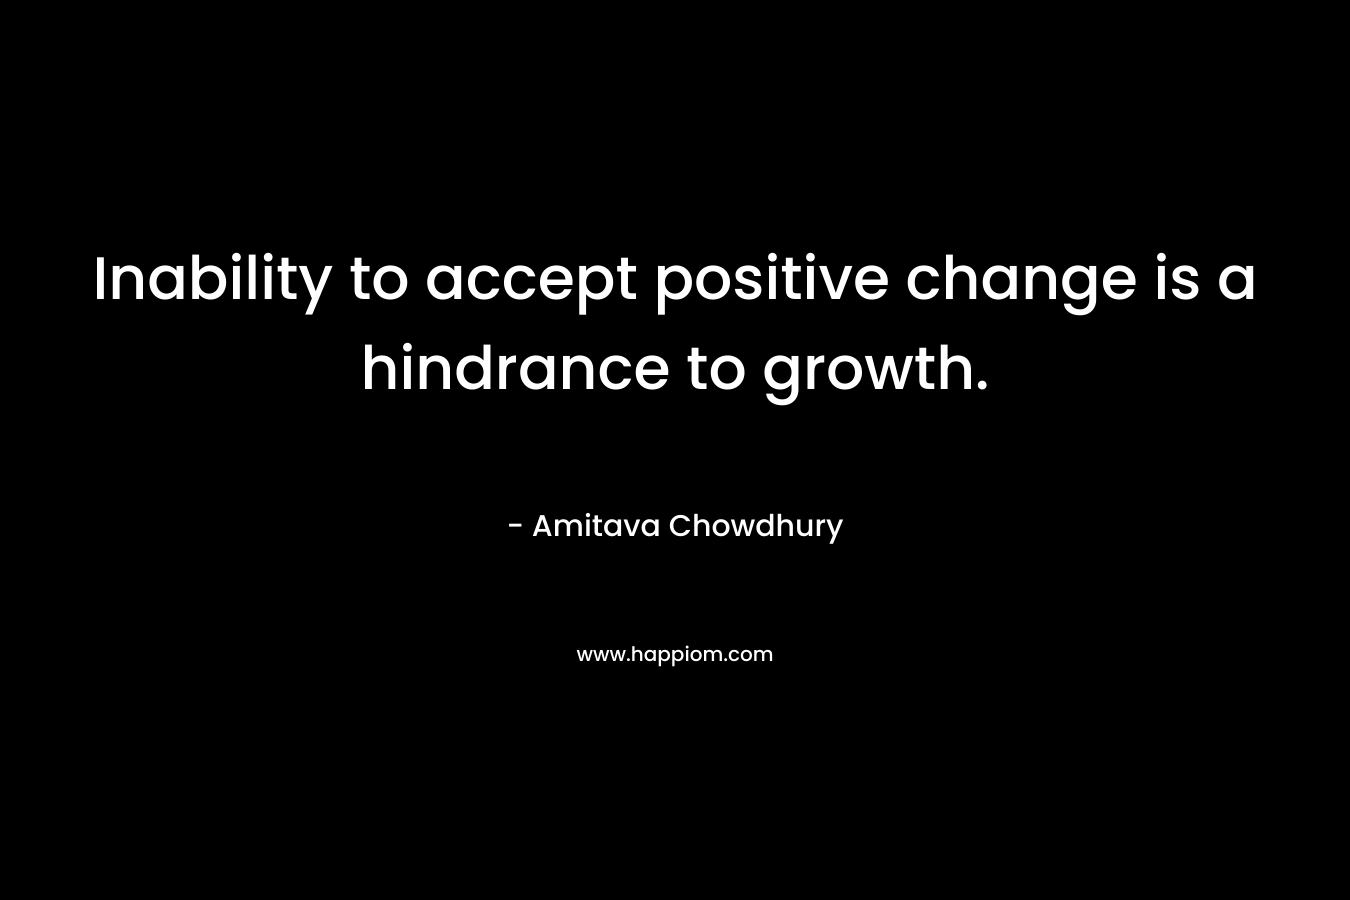 Inability to accept positive change is a hindrance to growth.